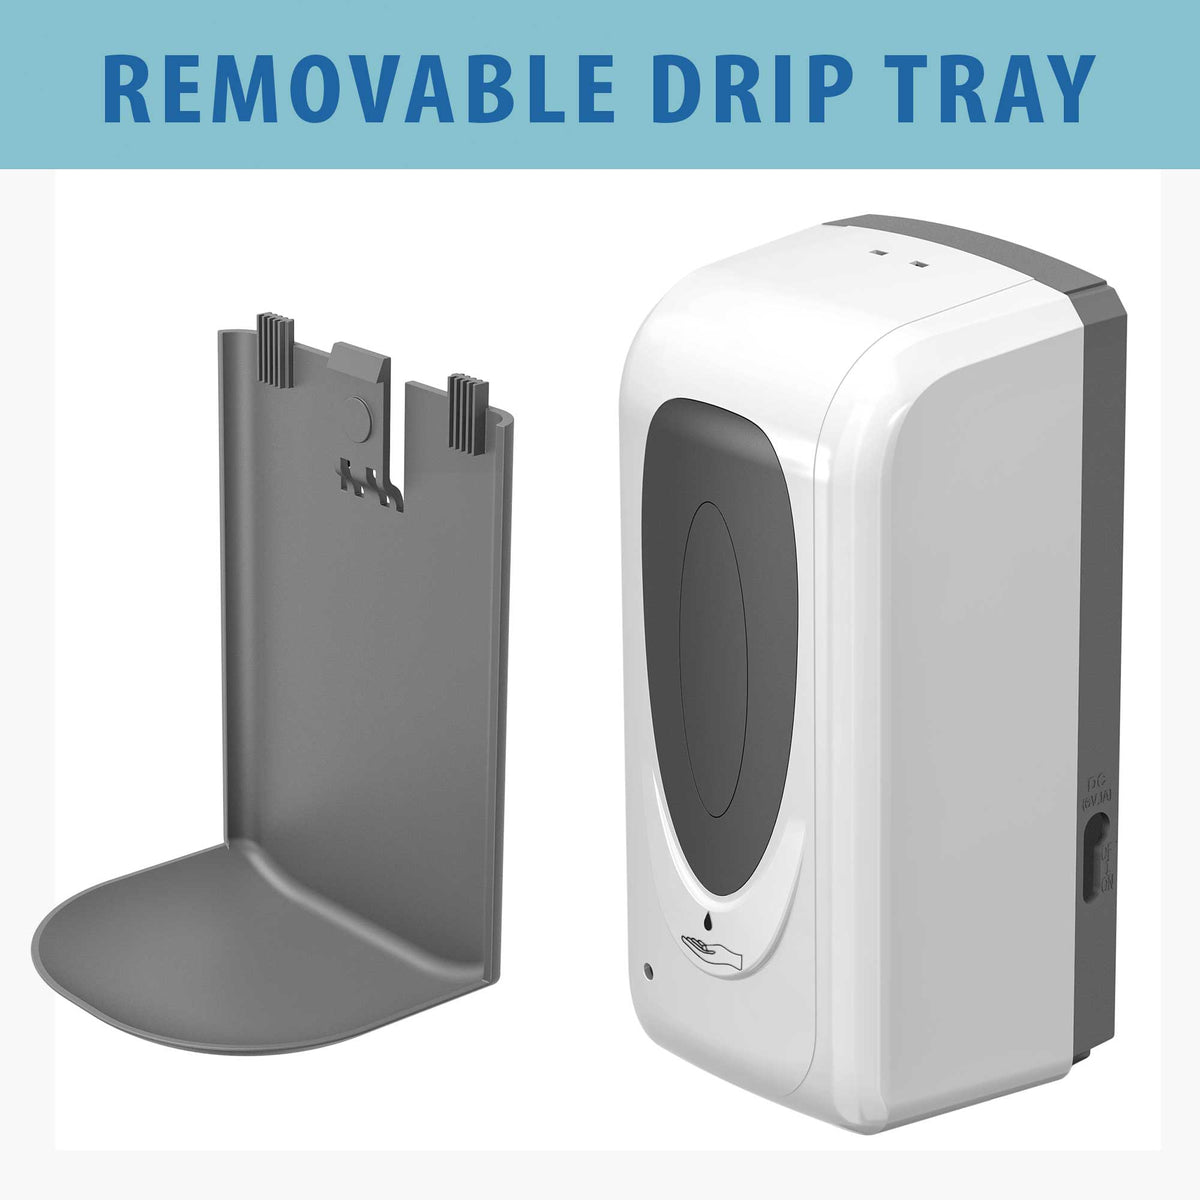 Removable Drip Tray